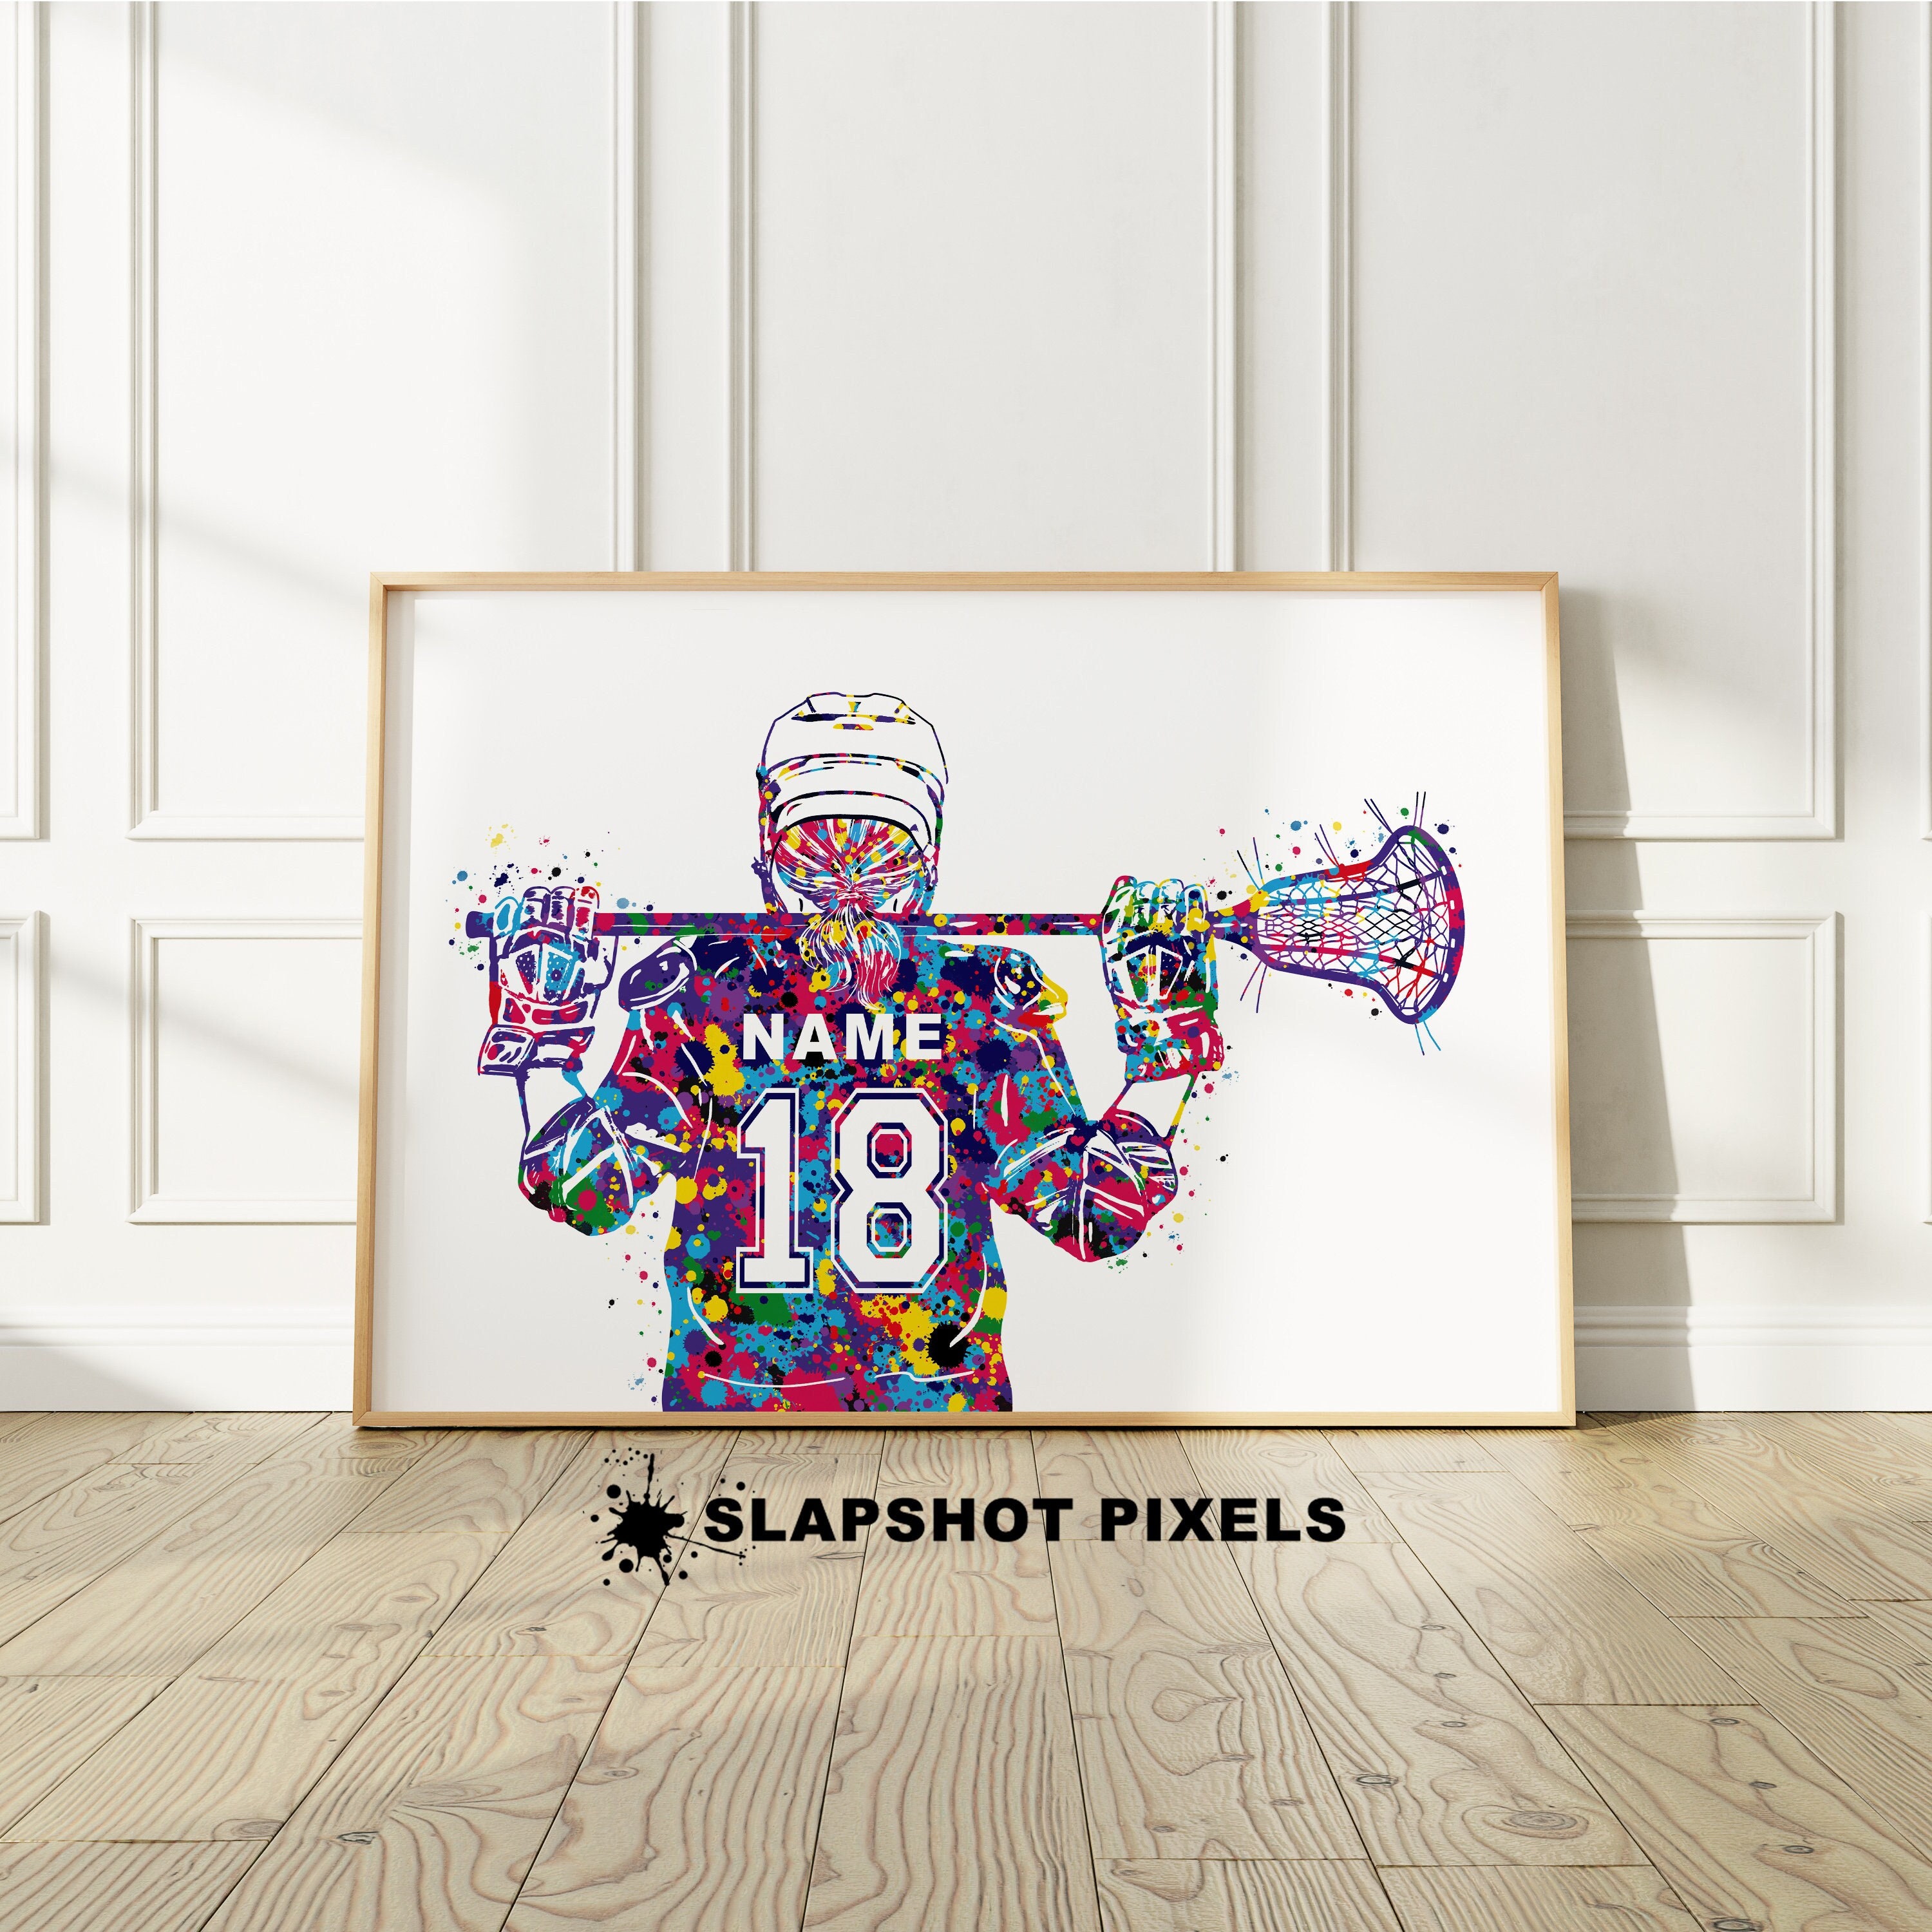 Lacrosse Sticks Pink Sports Girl Power Poster for Sale by